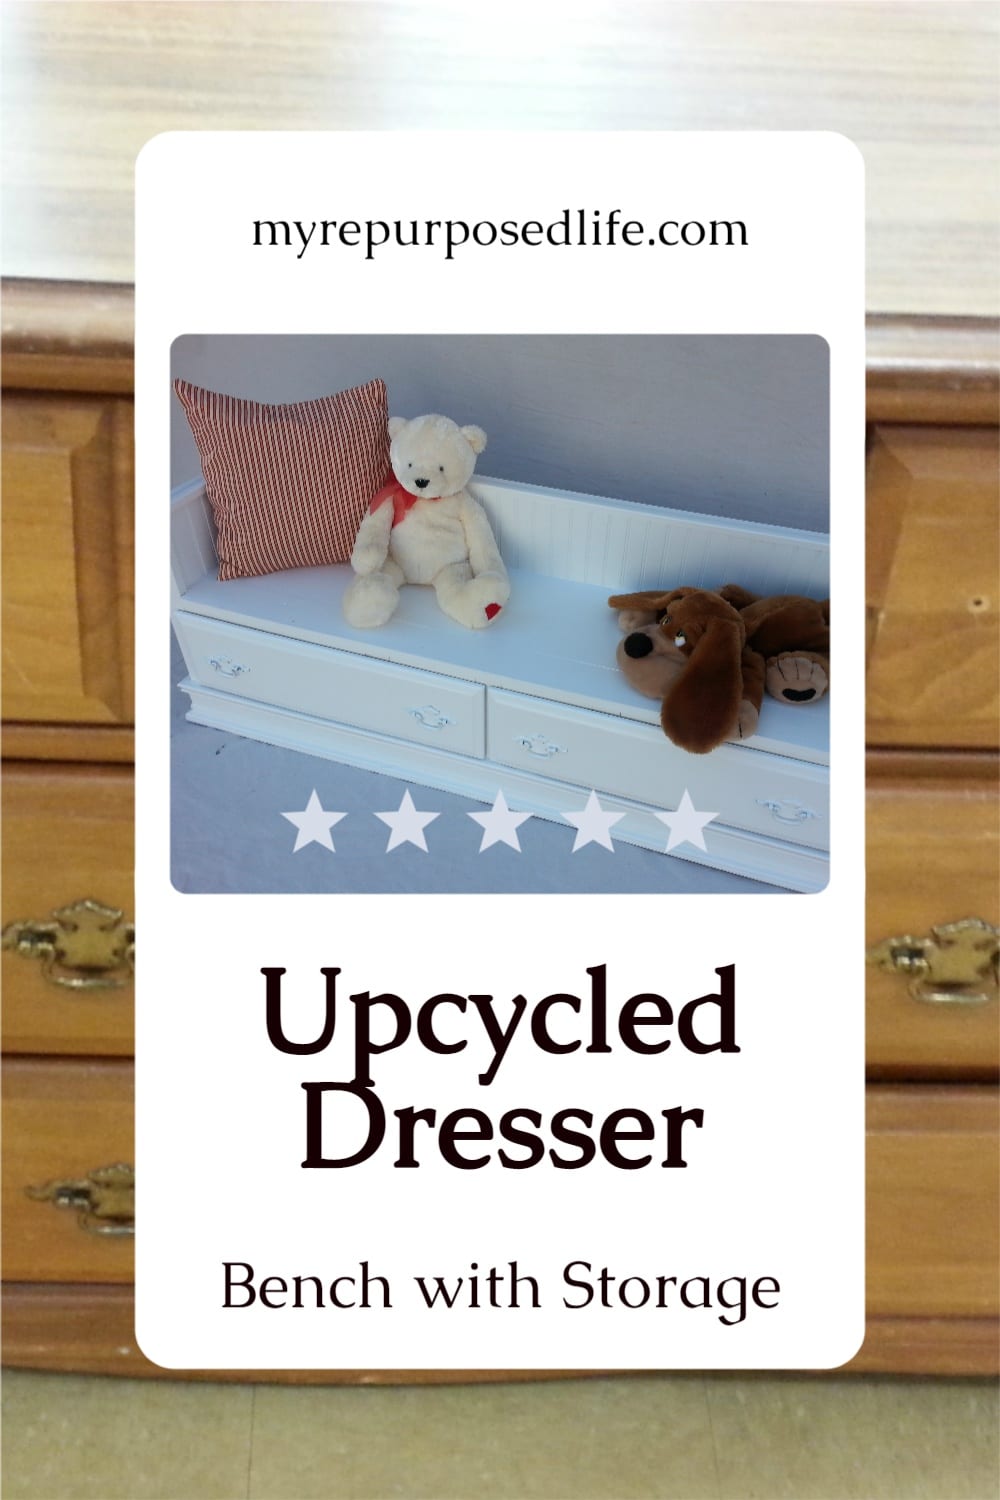 Use an old (cheap) dresser to repurpose into a bench with storage, perfect for the kids! Step by step directions included so you can do this project yourself. #MyRepurposedLife #repurposed #dresser #bench #kids #furniture via @repurposedlife